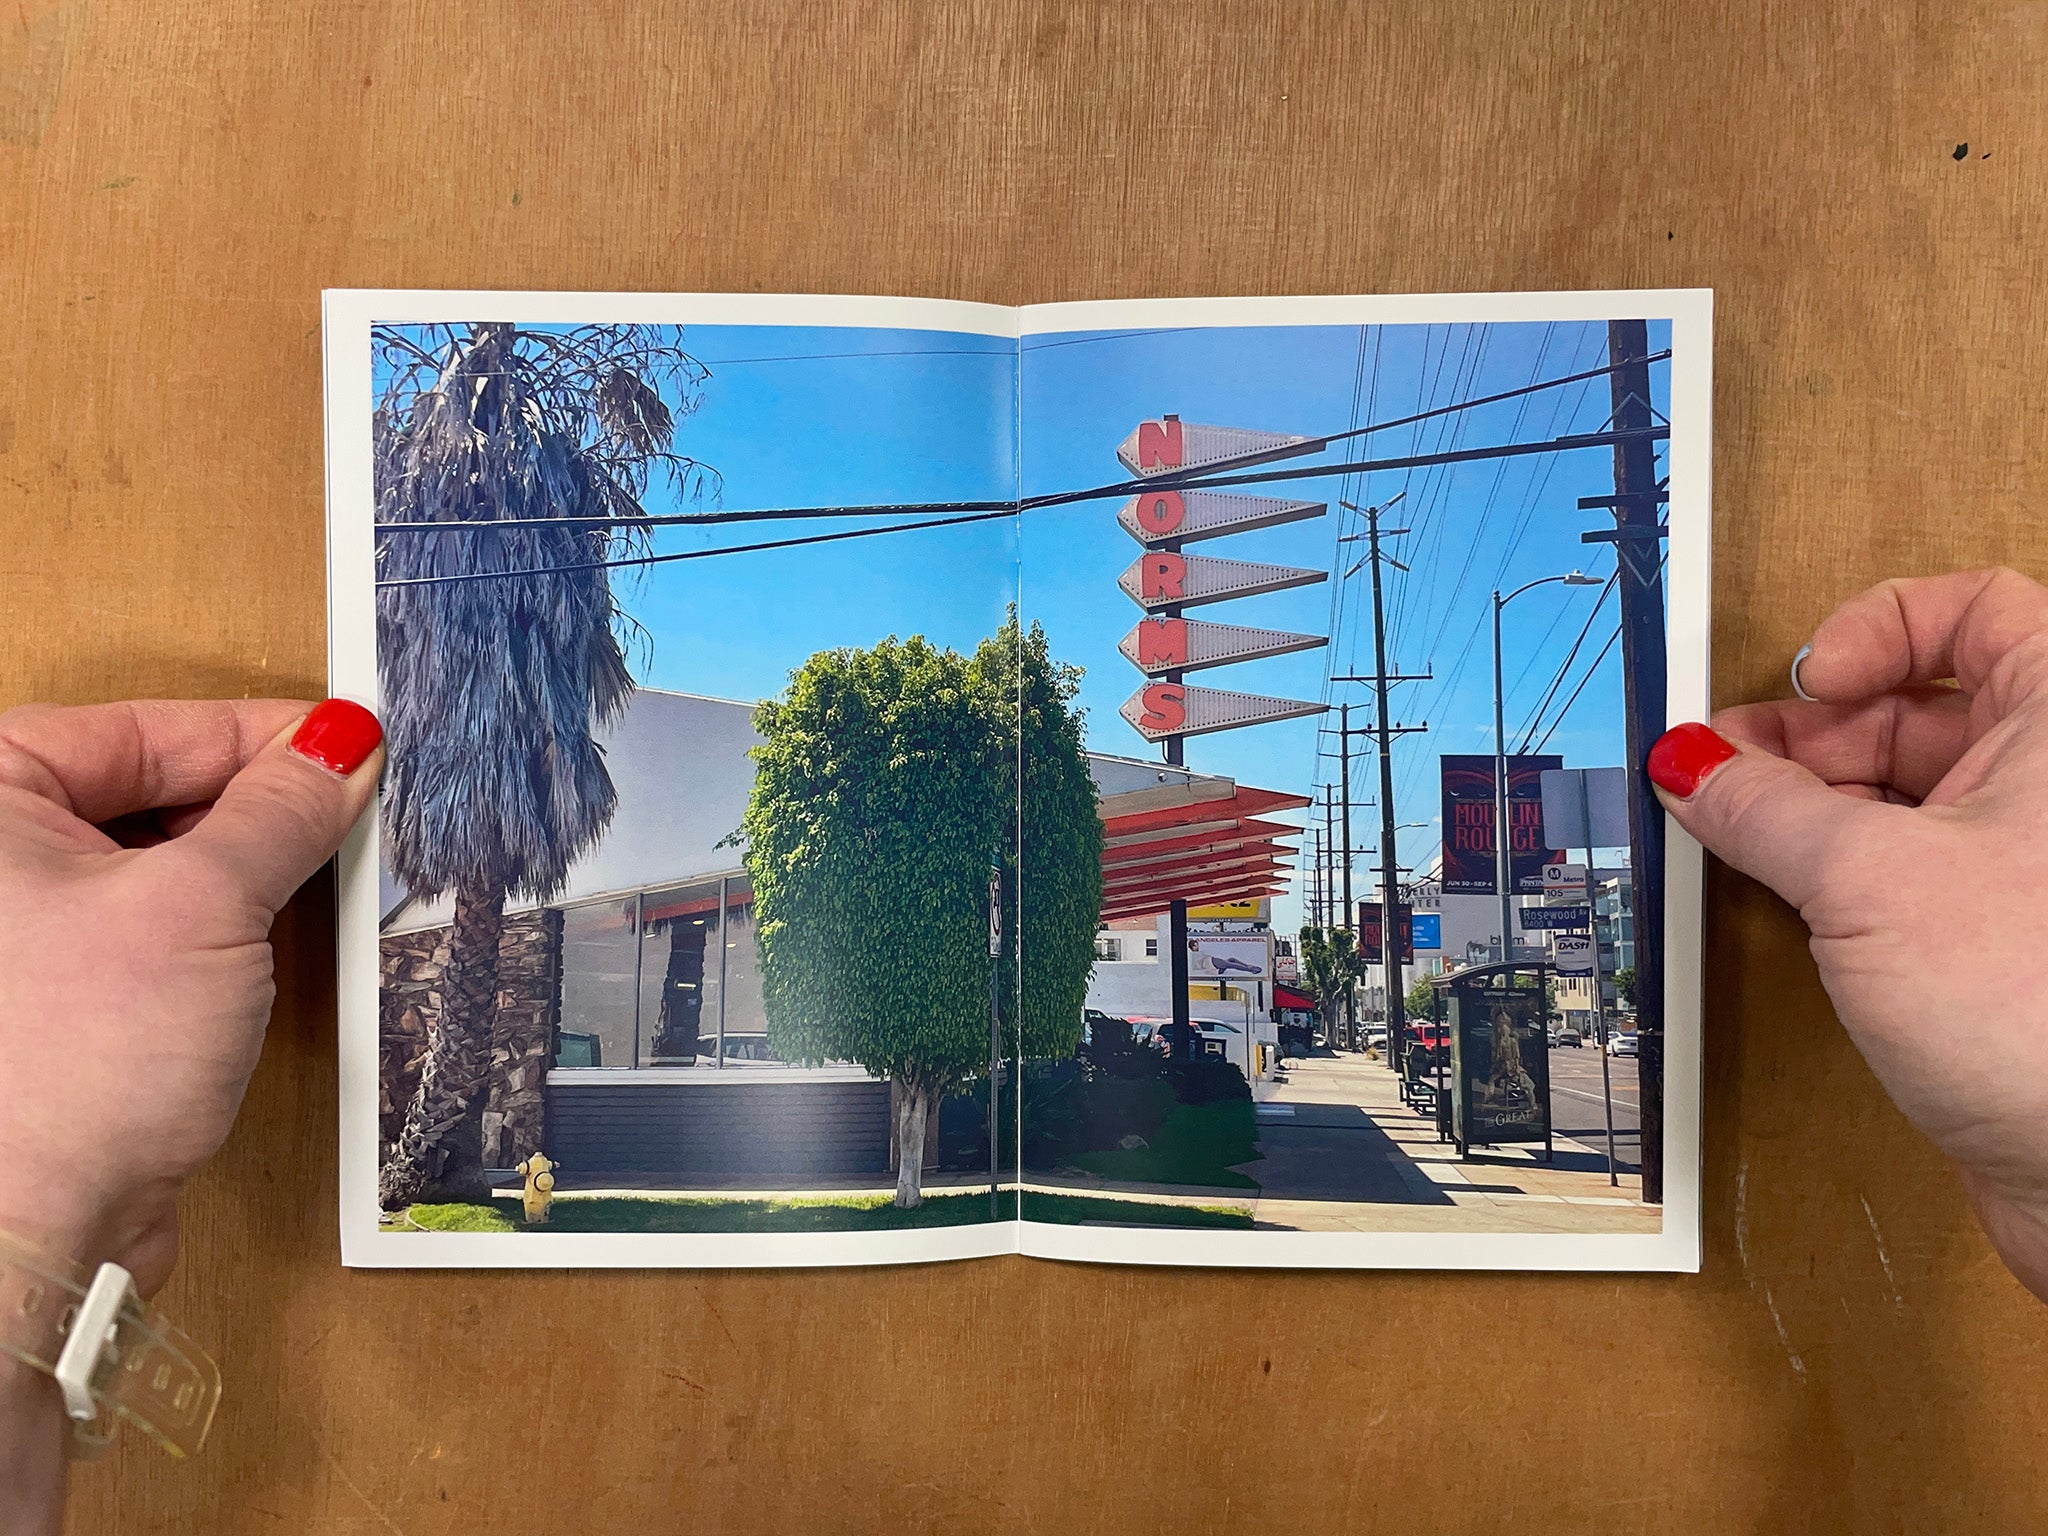 L.A. SIGNS ZINE SERIES VOL 1: RESTAURANTS by Paul Price